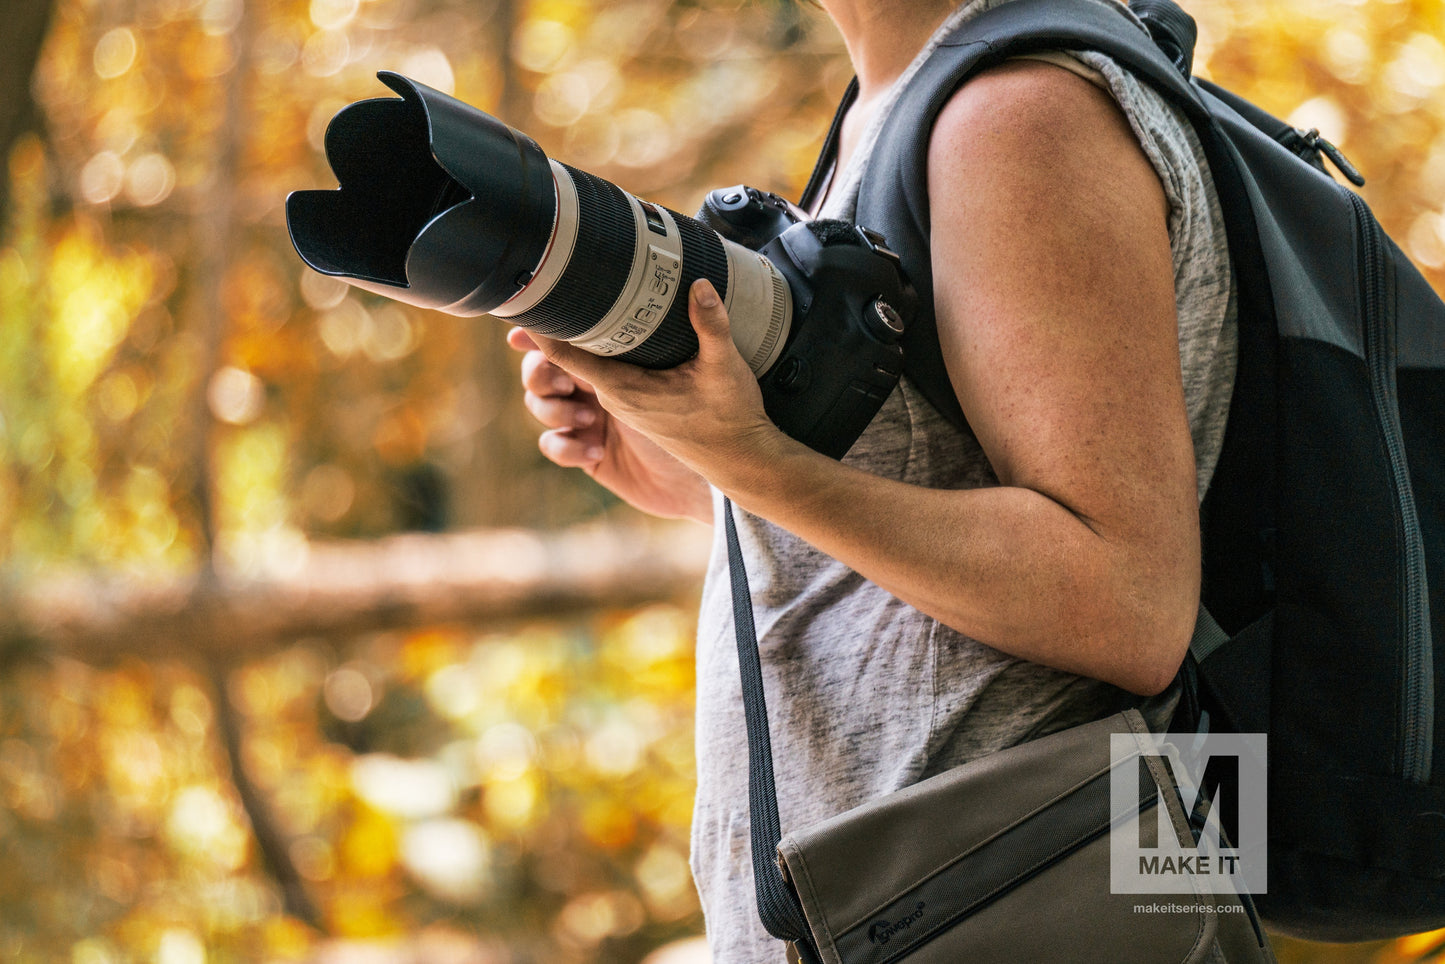 10 Ways to Make Money as a Photographer